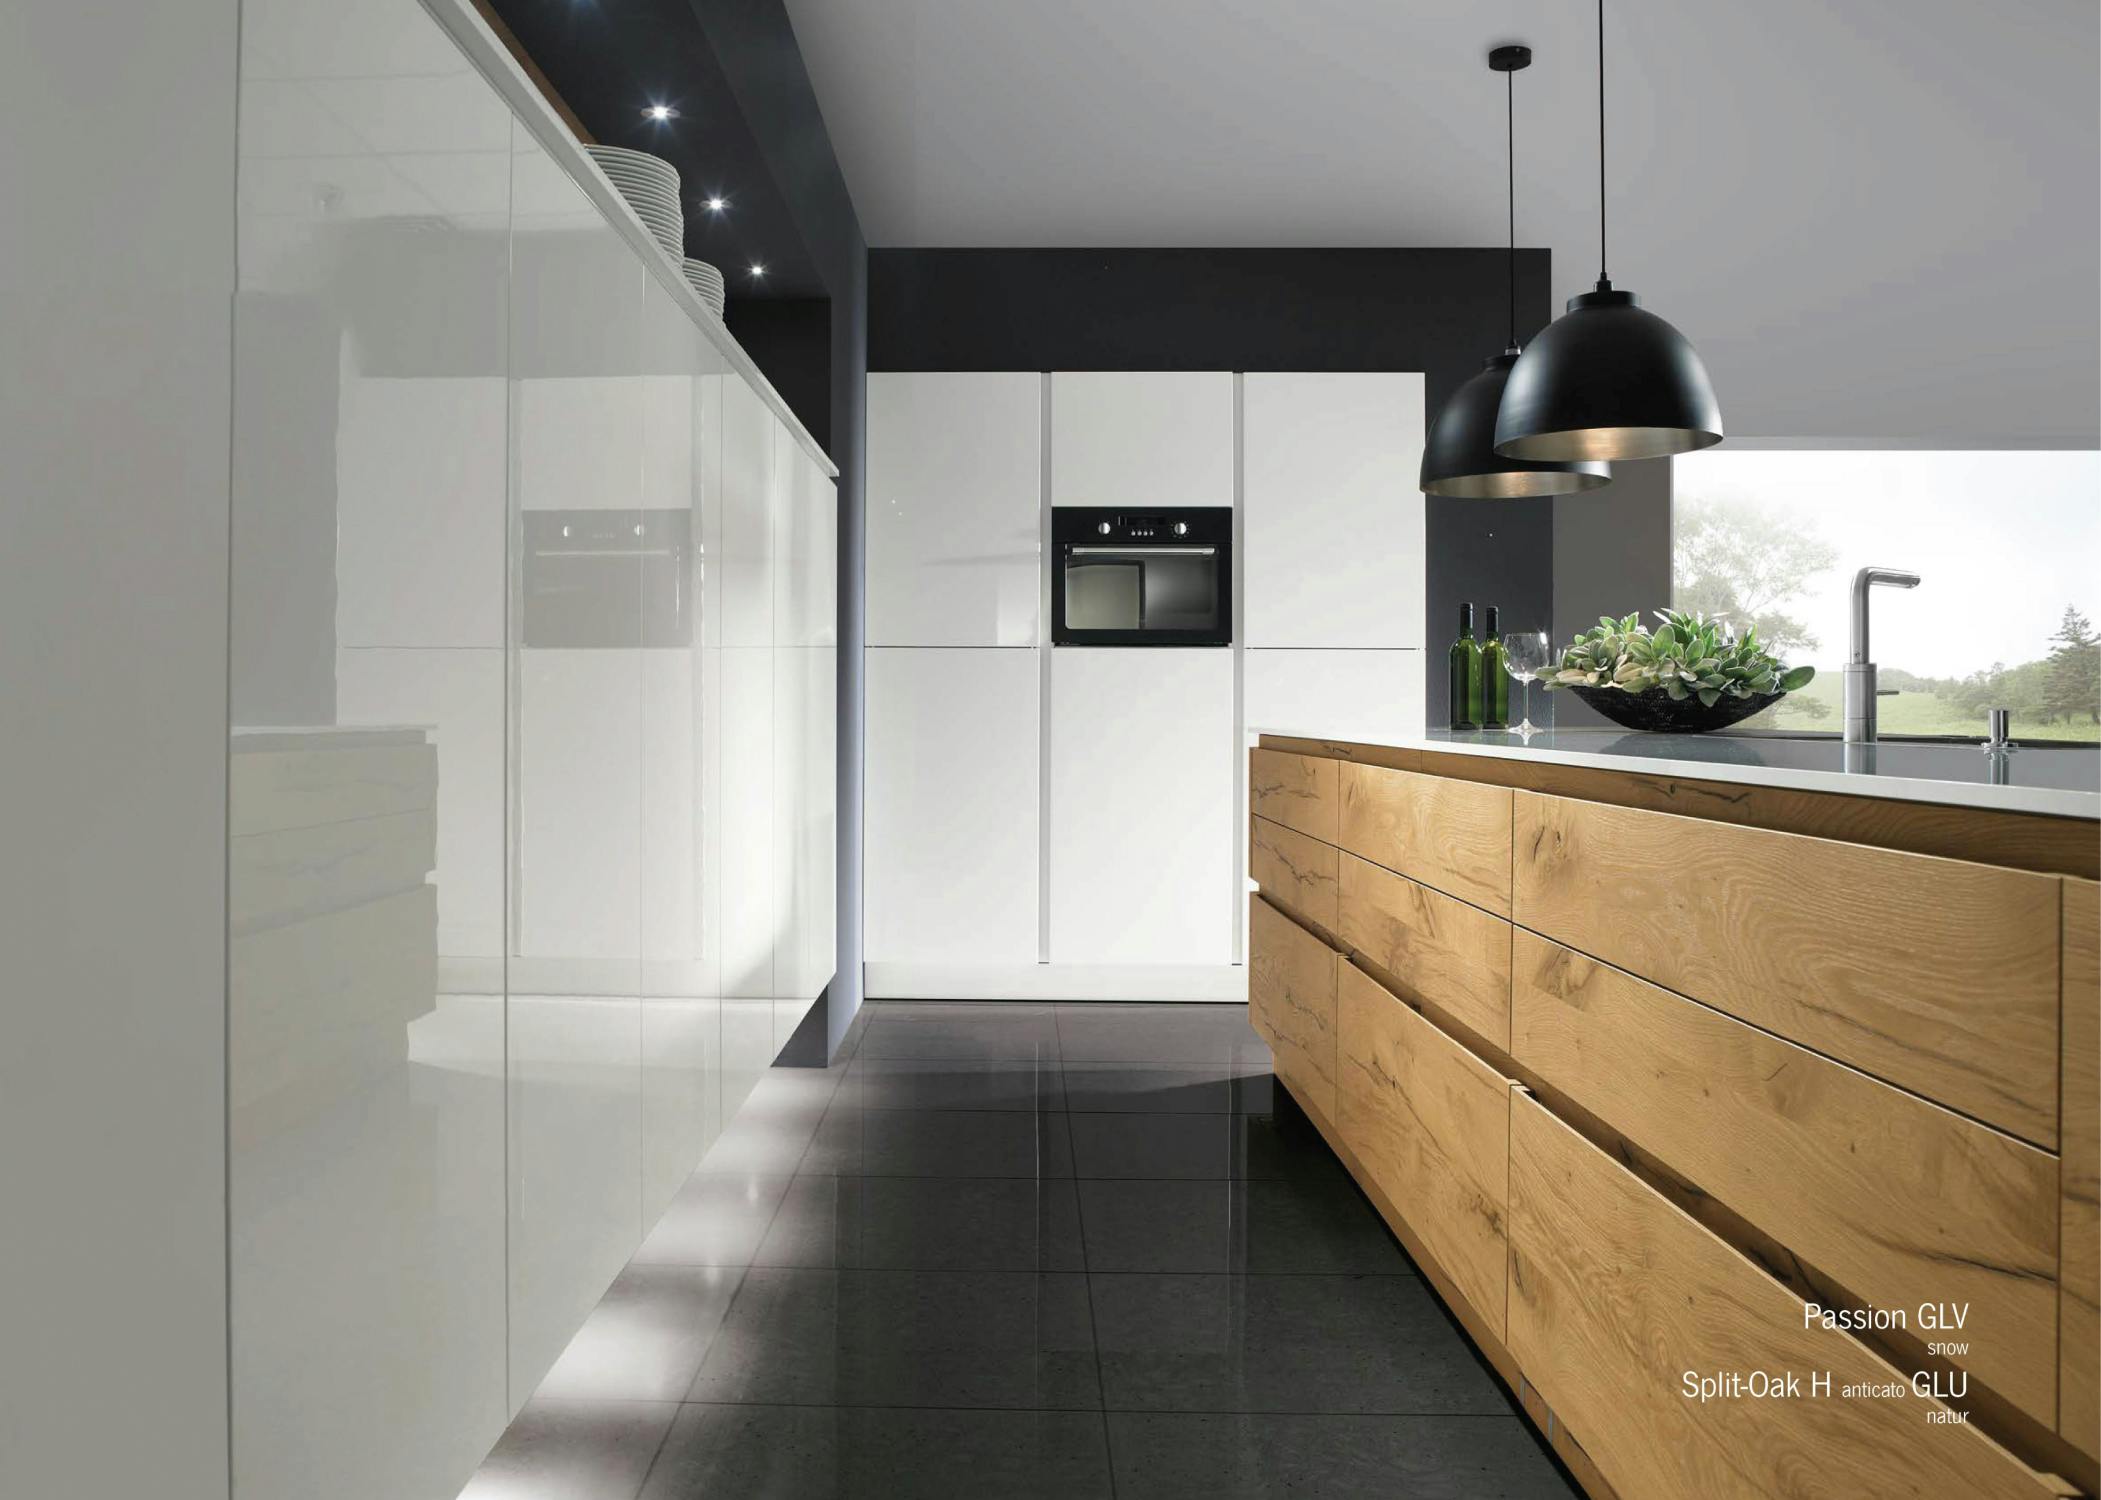 kitchen image modern design with wood and marbel island in the middle of the room with lights and elegant design